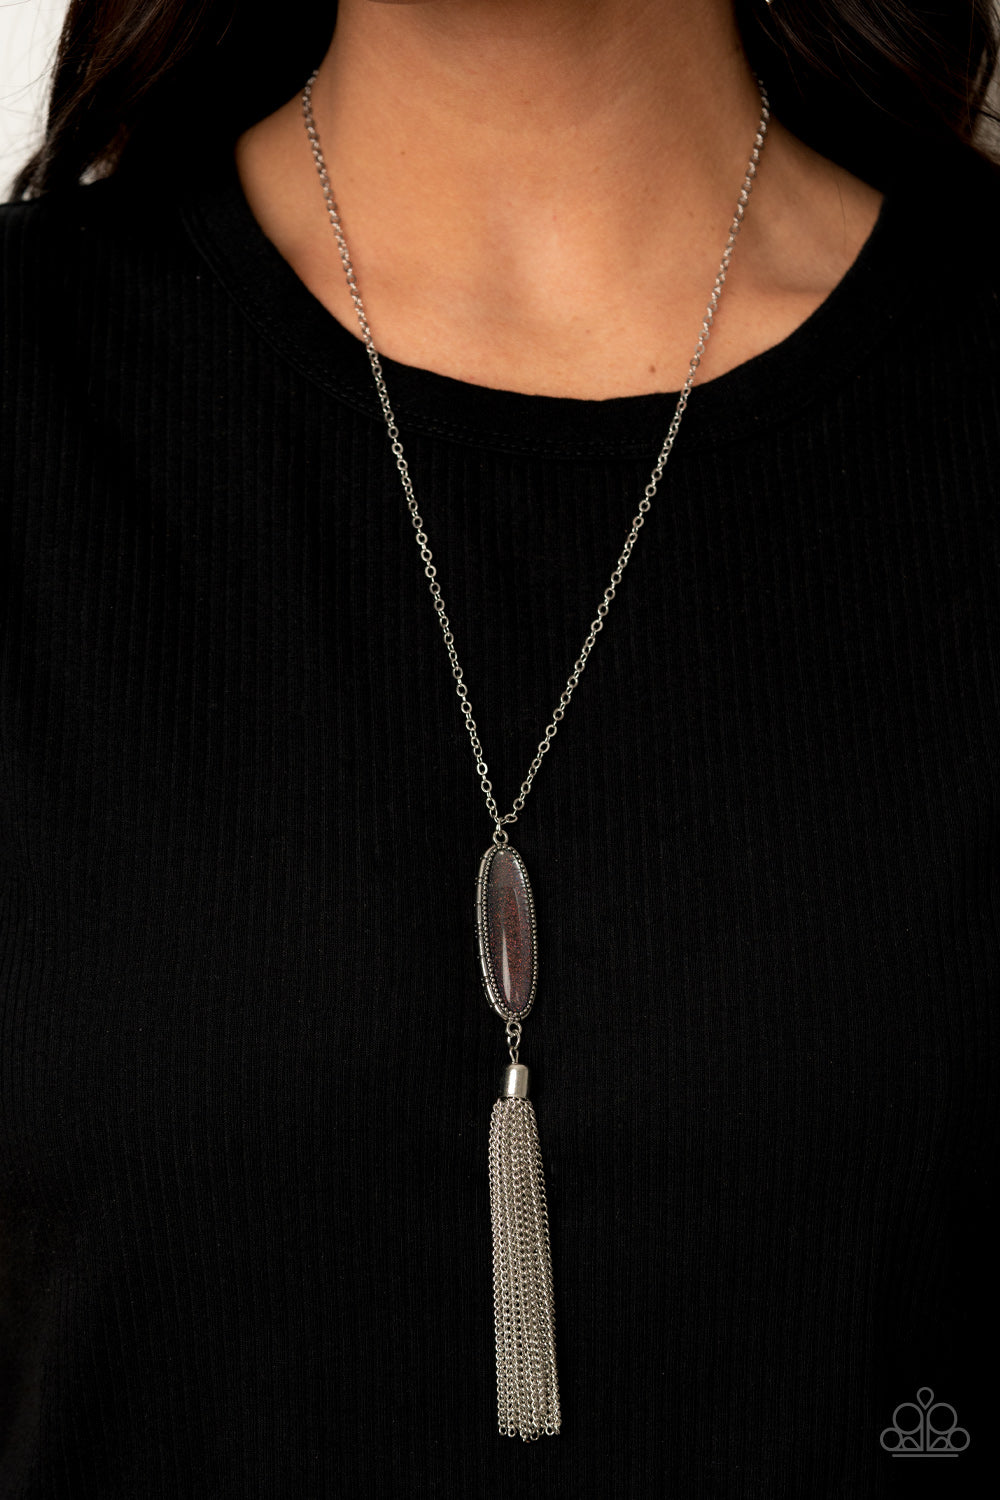 Stay Cool Multi Necklace - Paparazzi Accessories  A shimmery silver tassel streams from the bottom of a glittery beaded pendant, creating a dazzling look at the bottom of a lengthened silver chain. Features an adjustable clasp closure.  Sold as one individual necklace. Includes one pair of matching earrings.